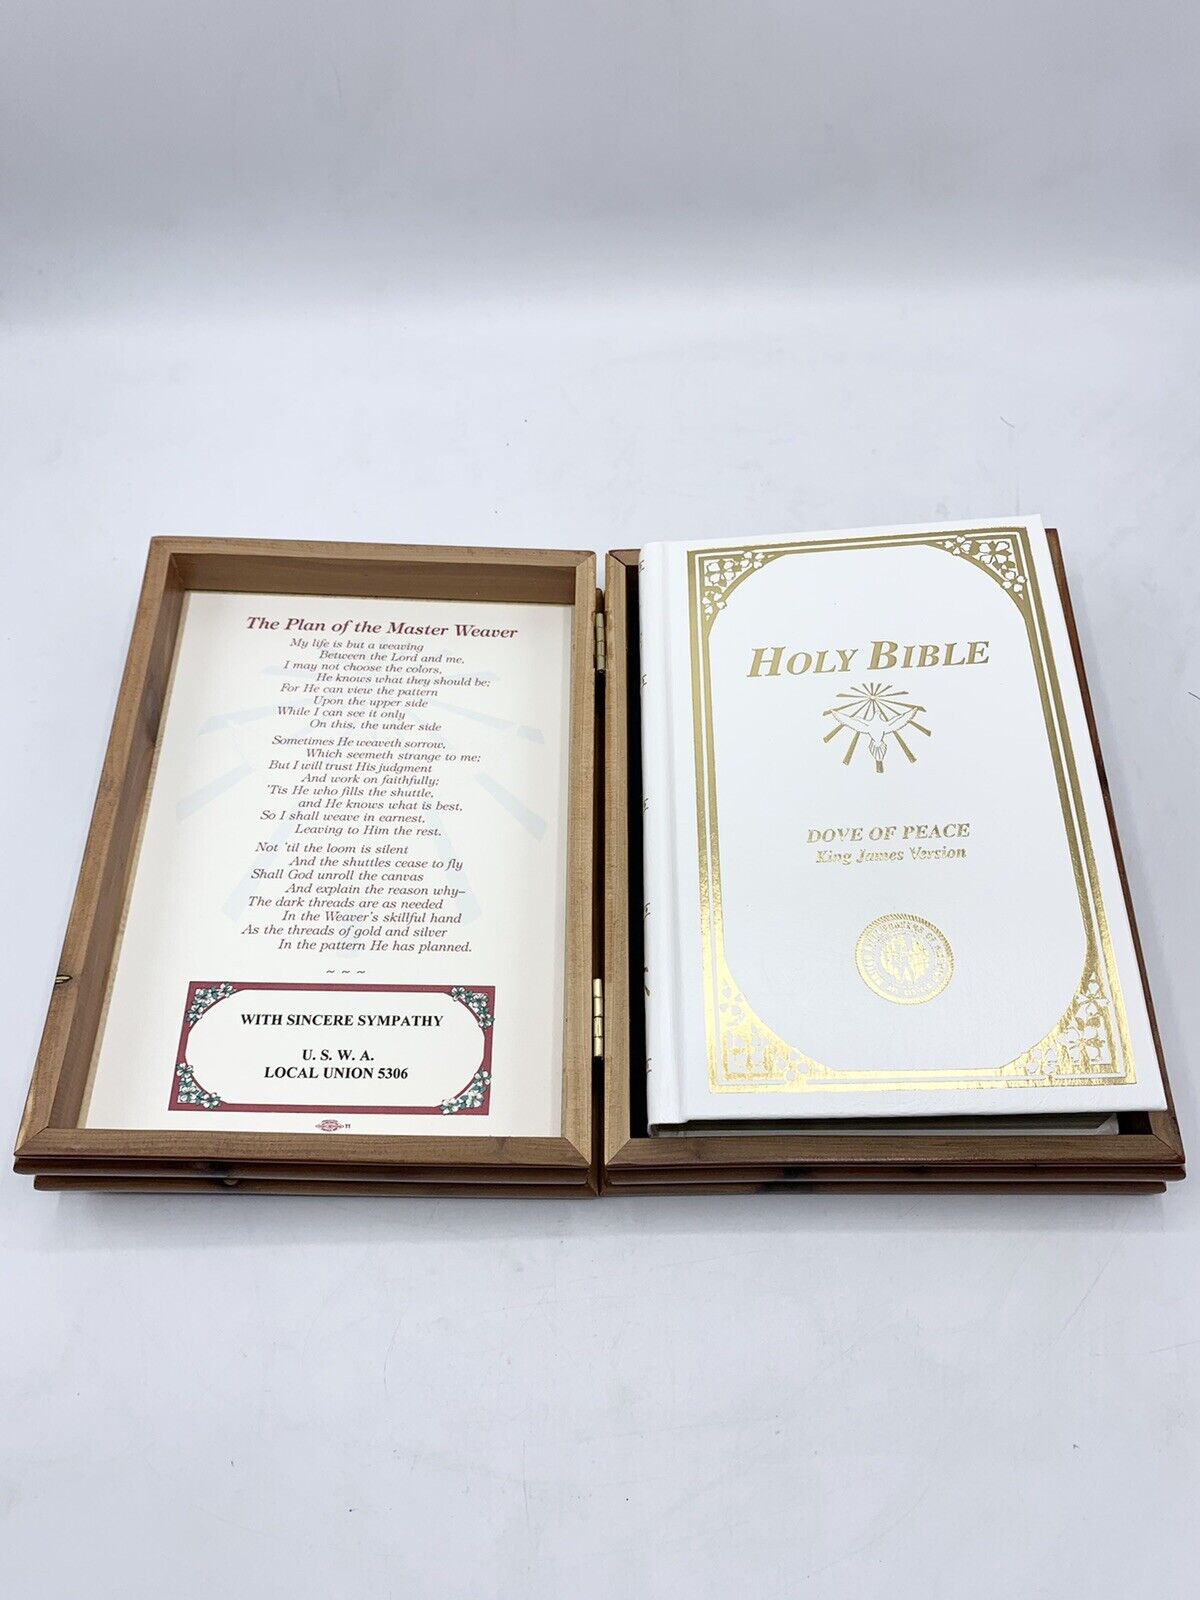 Holy Bible Dove of Peace King James Version in Wooden Cedar Box Case